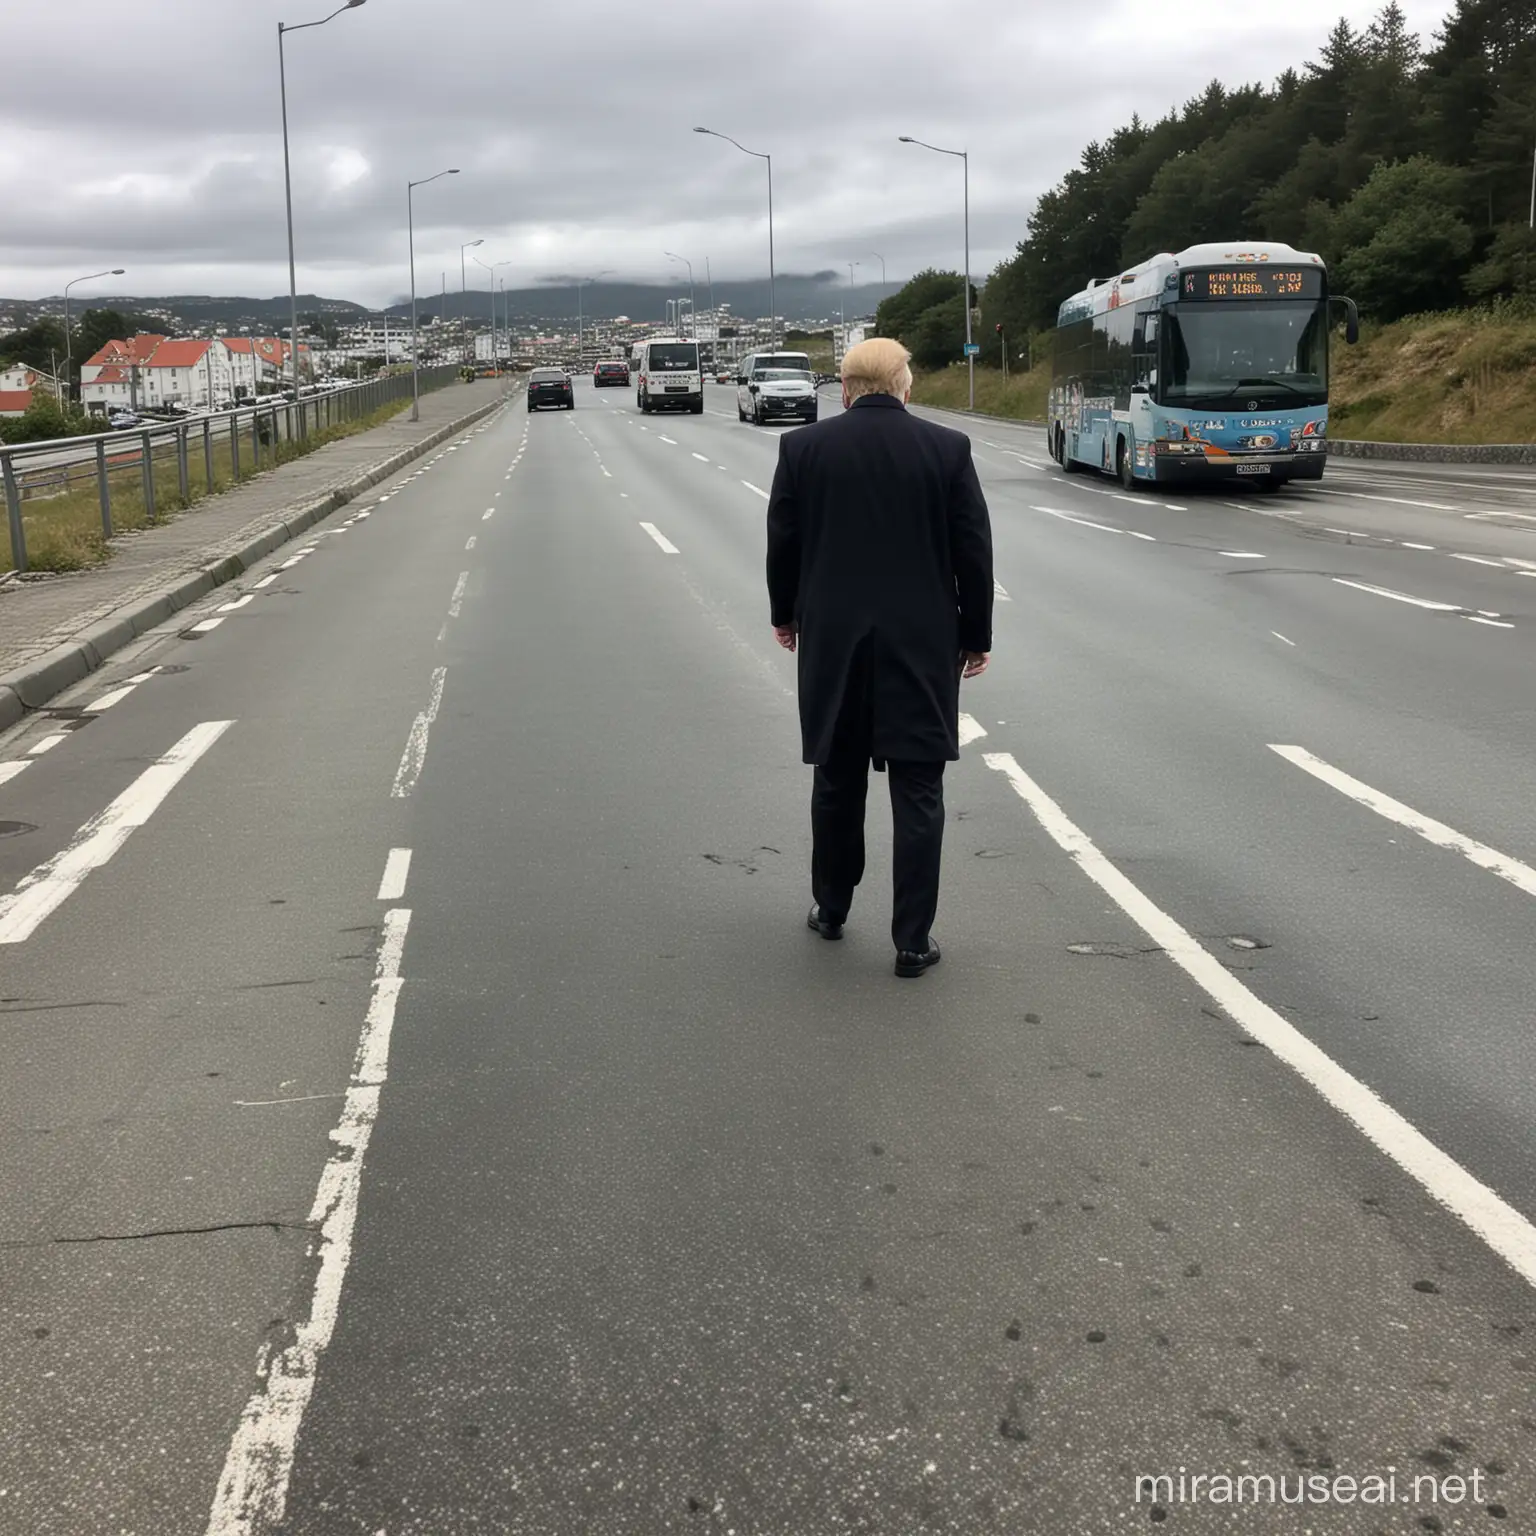 can you make donald trump walking away from a buss on the side of the road while talking in his phone, in stavanger, norway